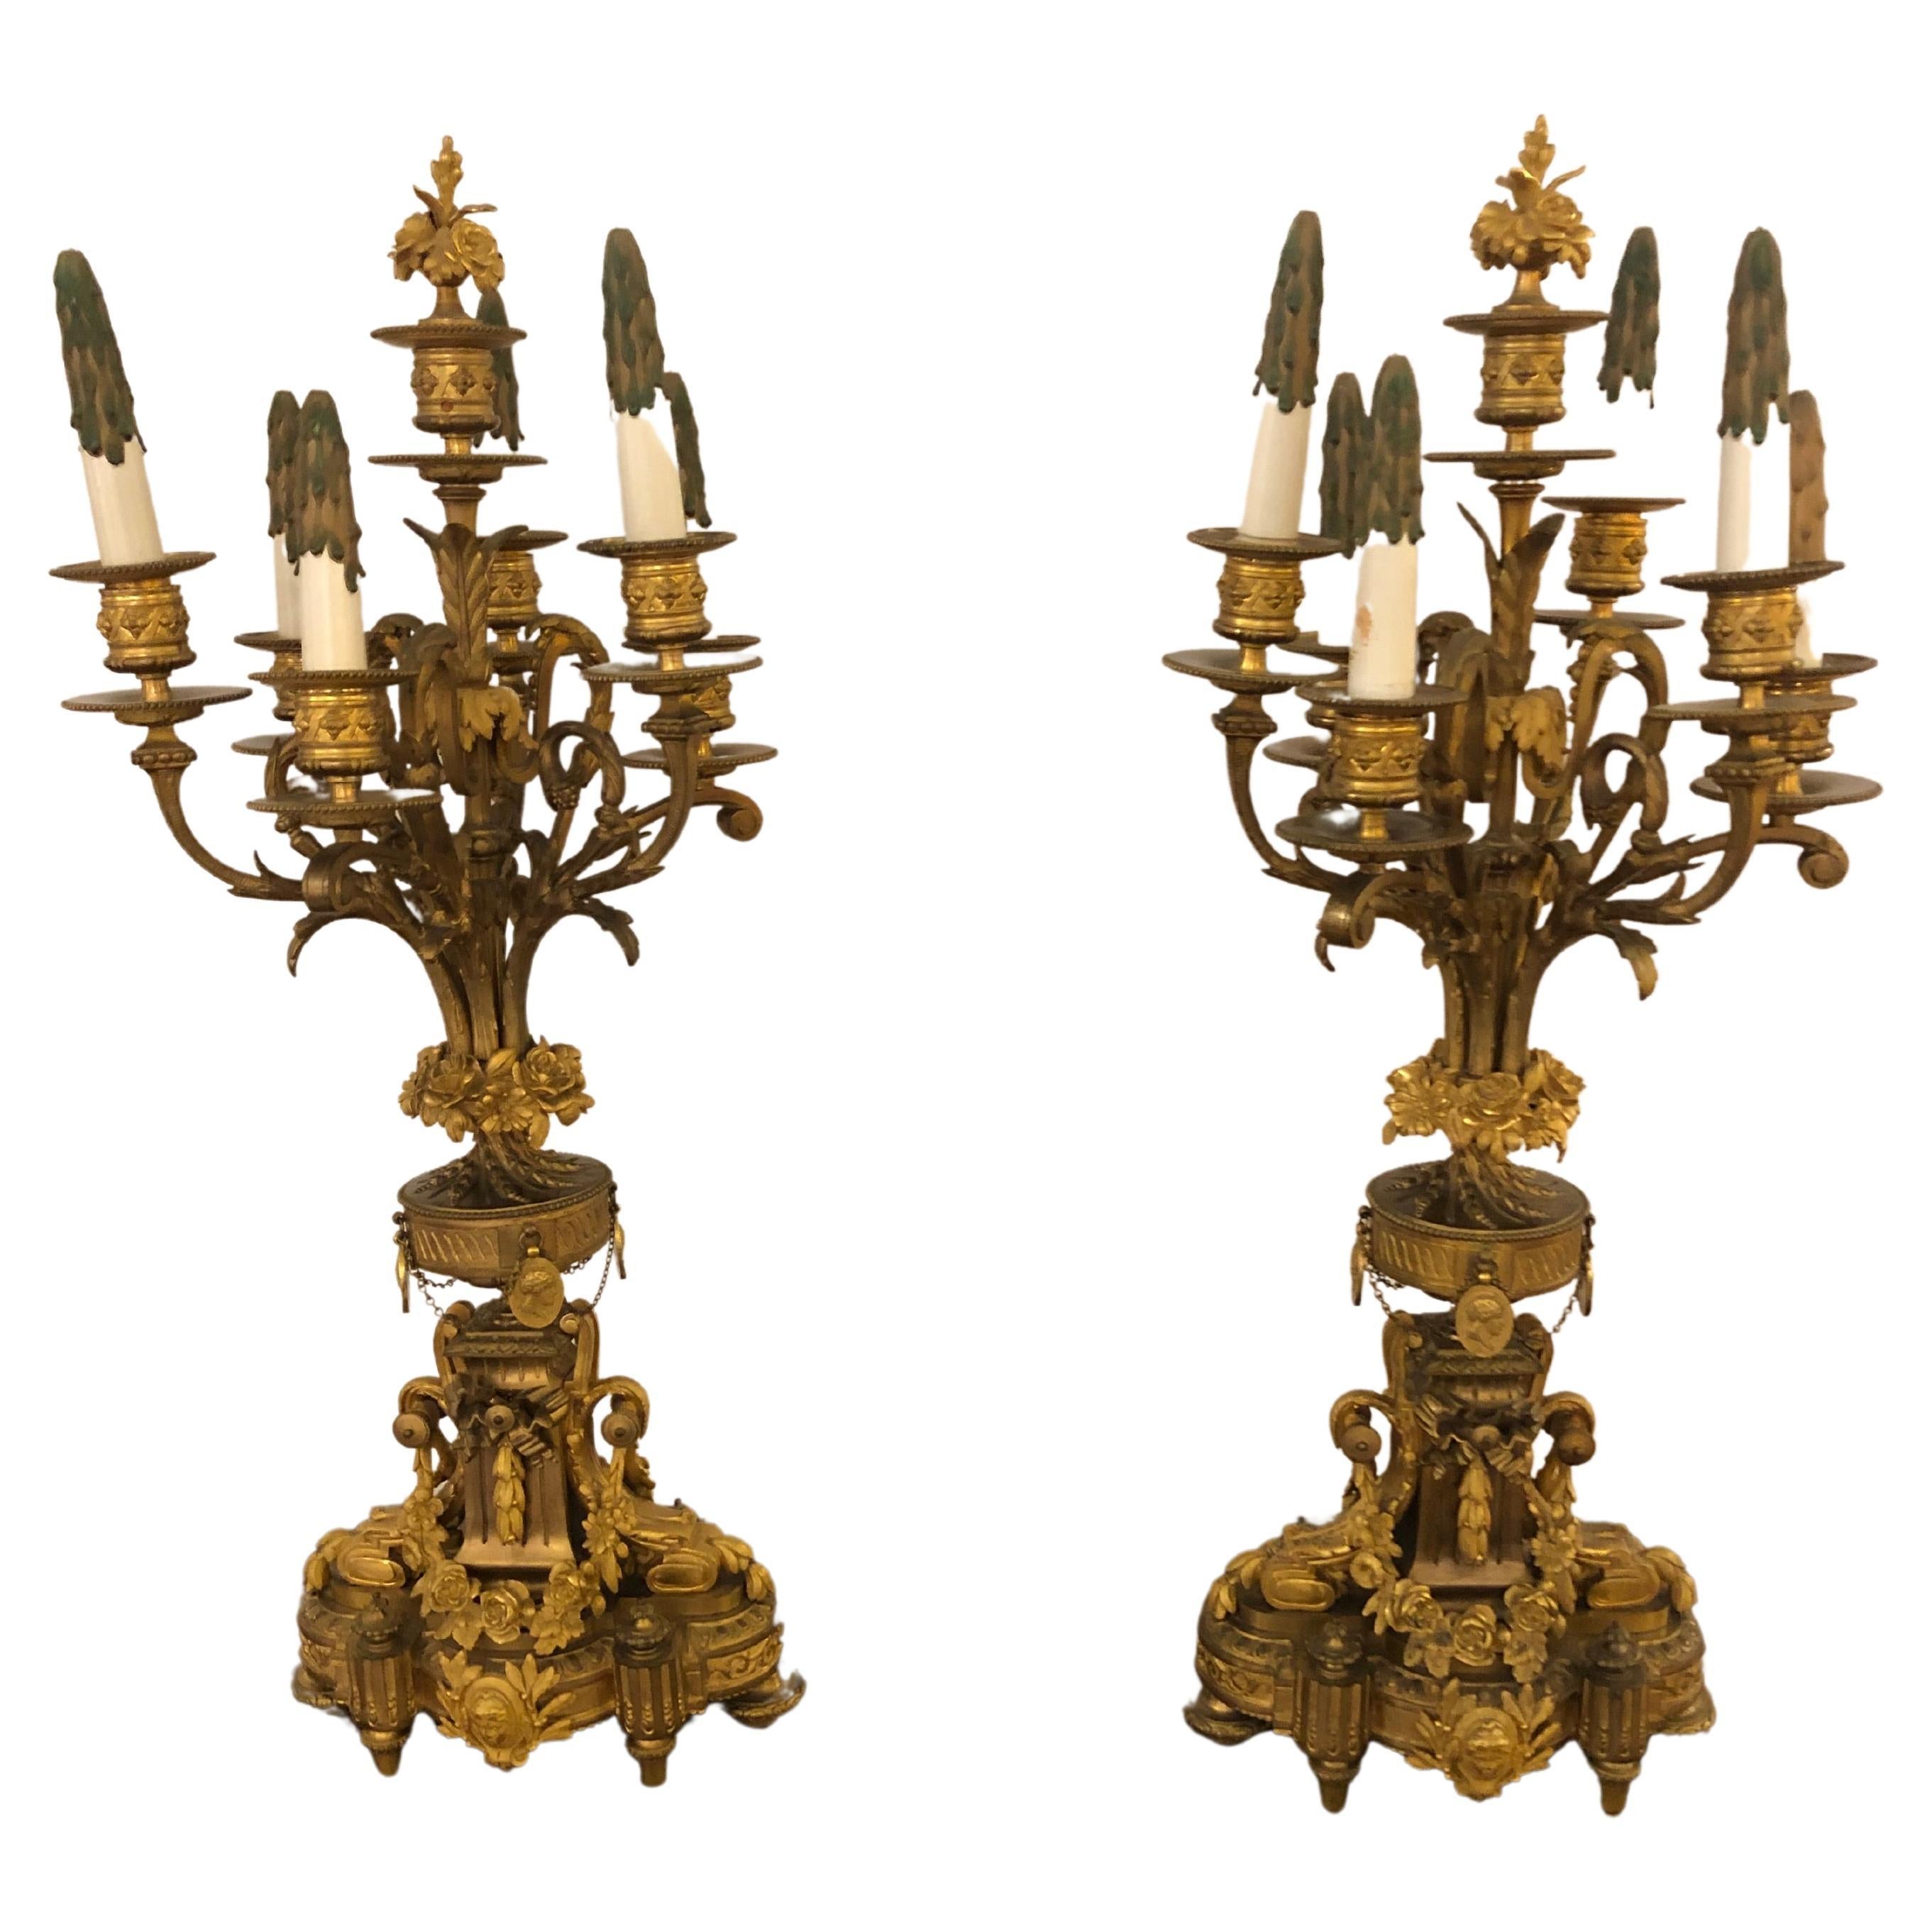 Magnificent Pair of Neoclassical Cast & Gilt Bronze Relief Ornate Candleabras